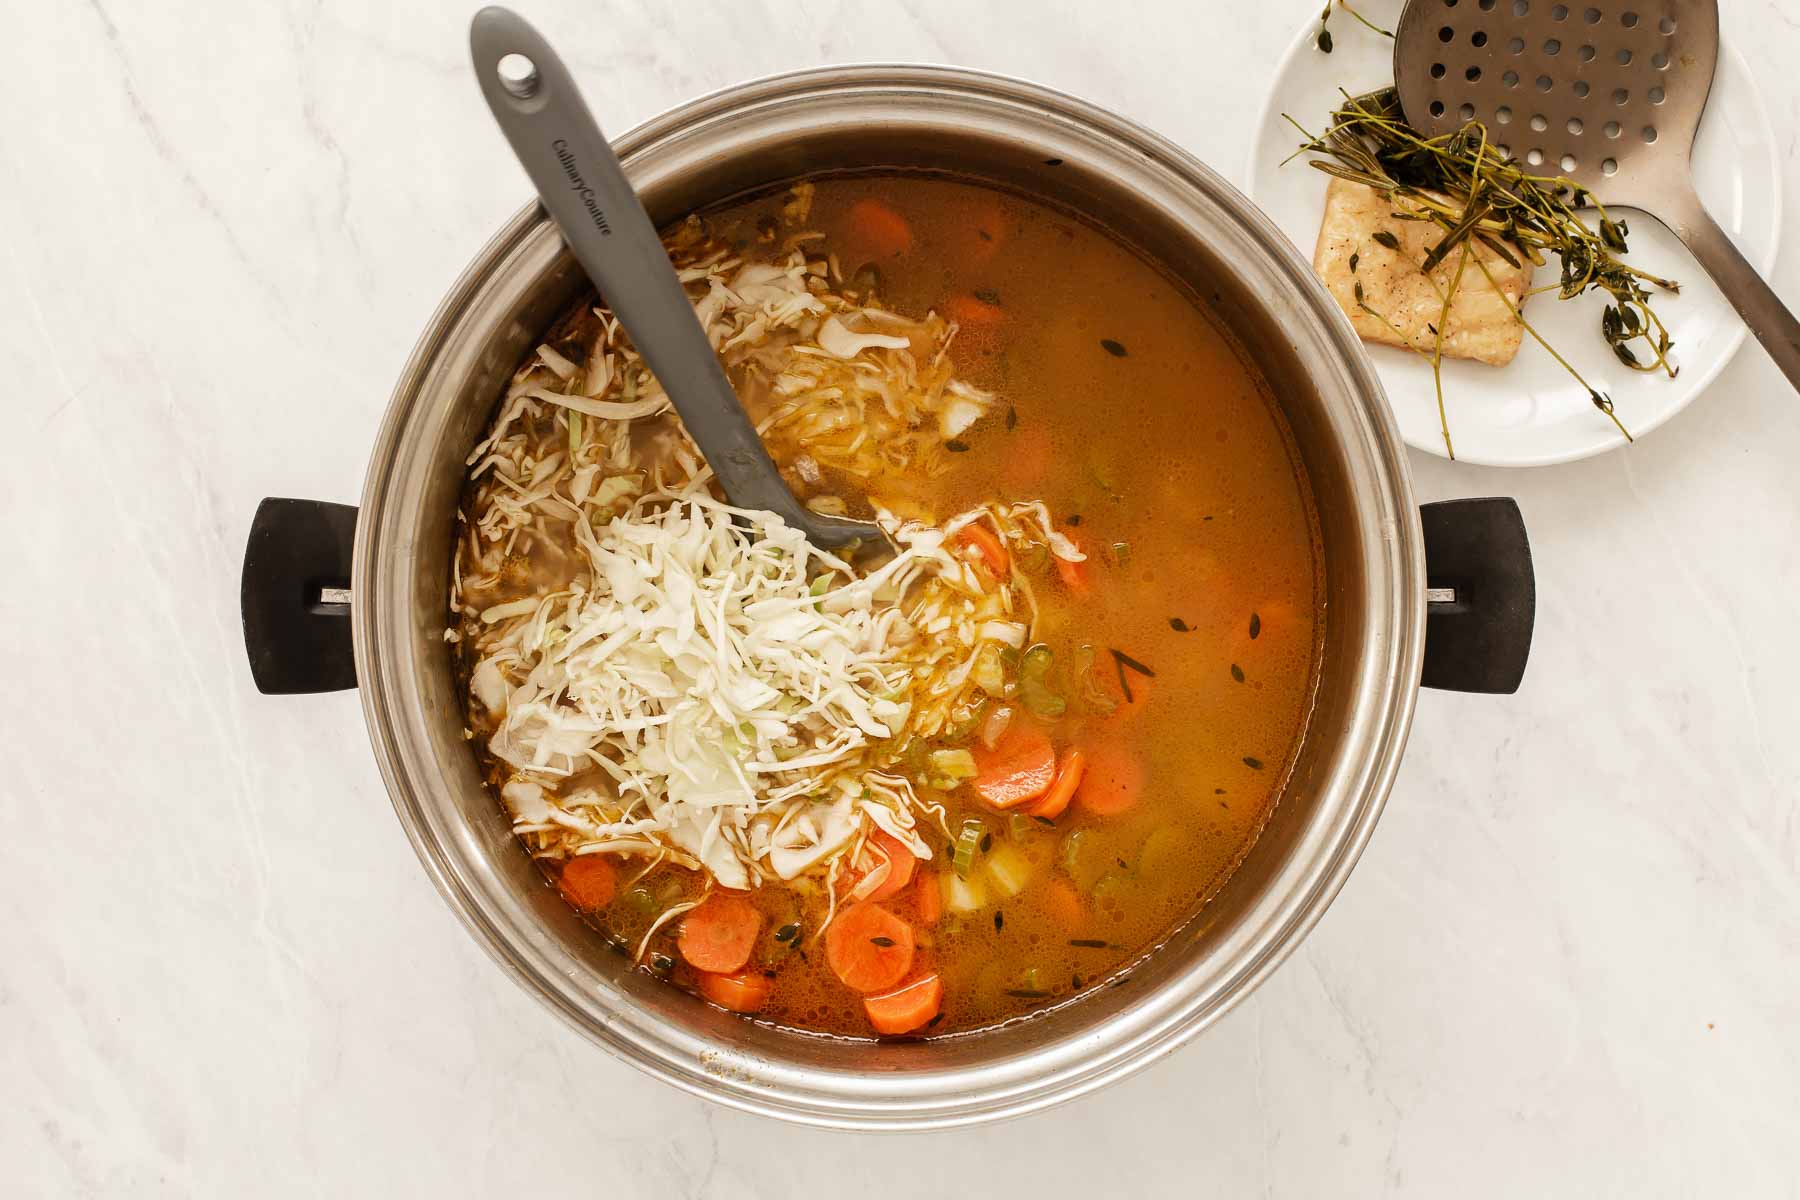 Stirring shredded Parmesan into yellow broth soup with carrots.